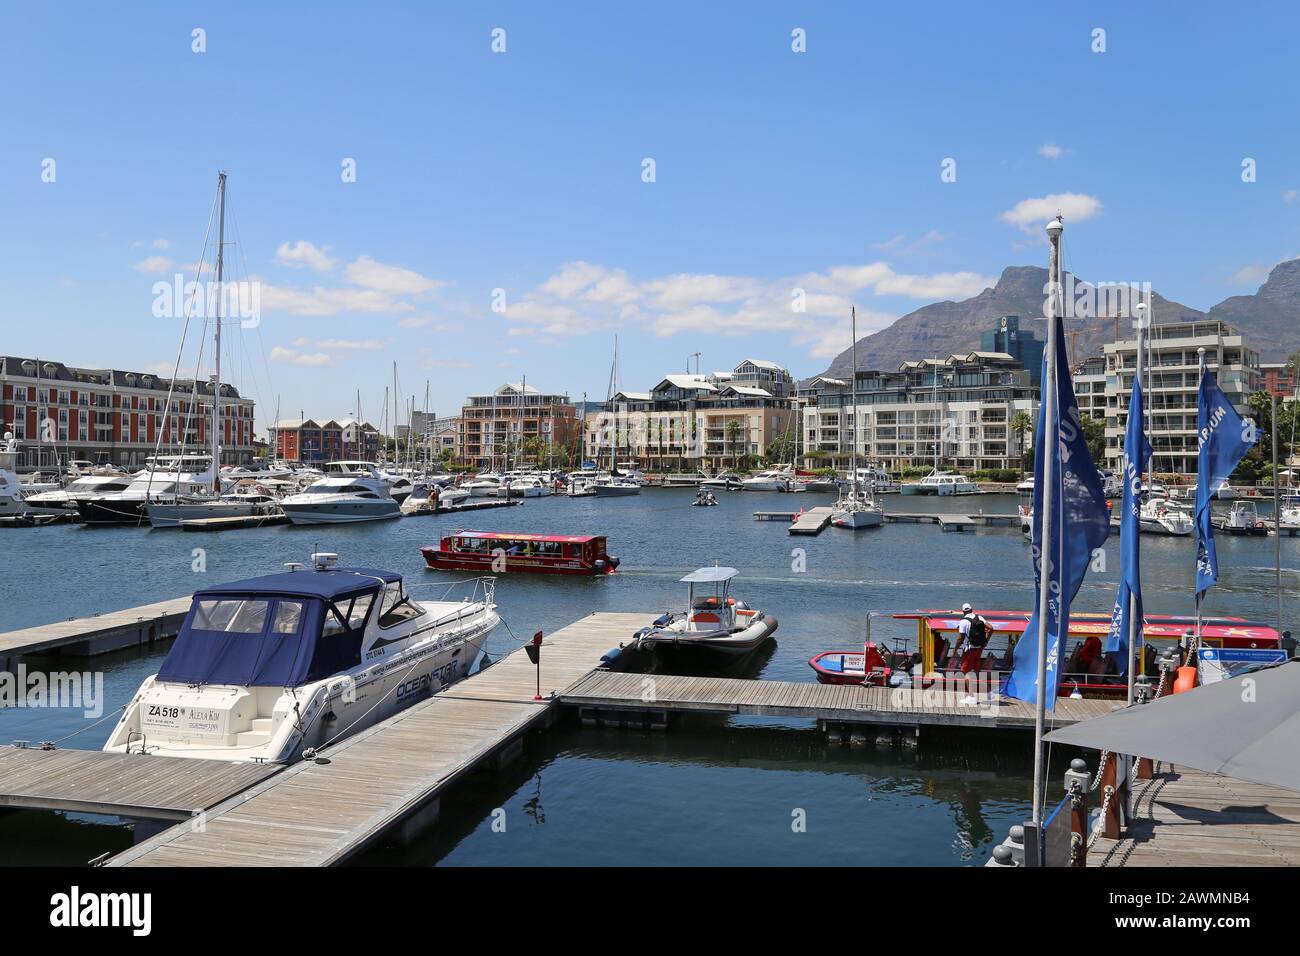 Marina, V&A (Victoria and Alfred) Waterfront, Cape Town, Table Bay, Western Cape Province, South Africa, Africa Stock Photo